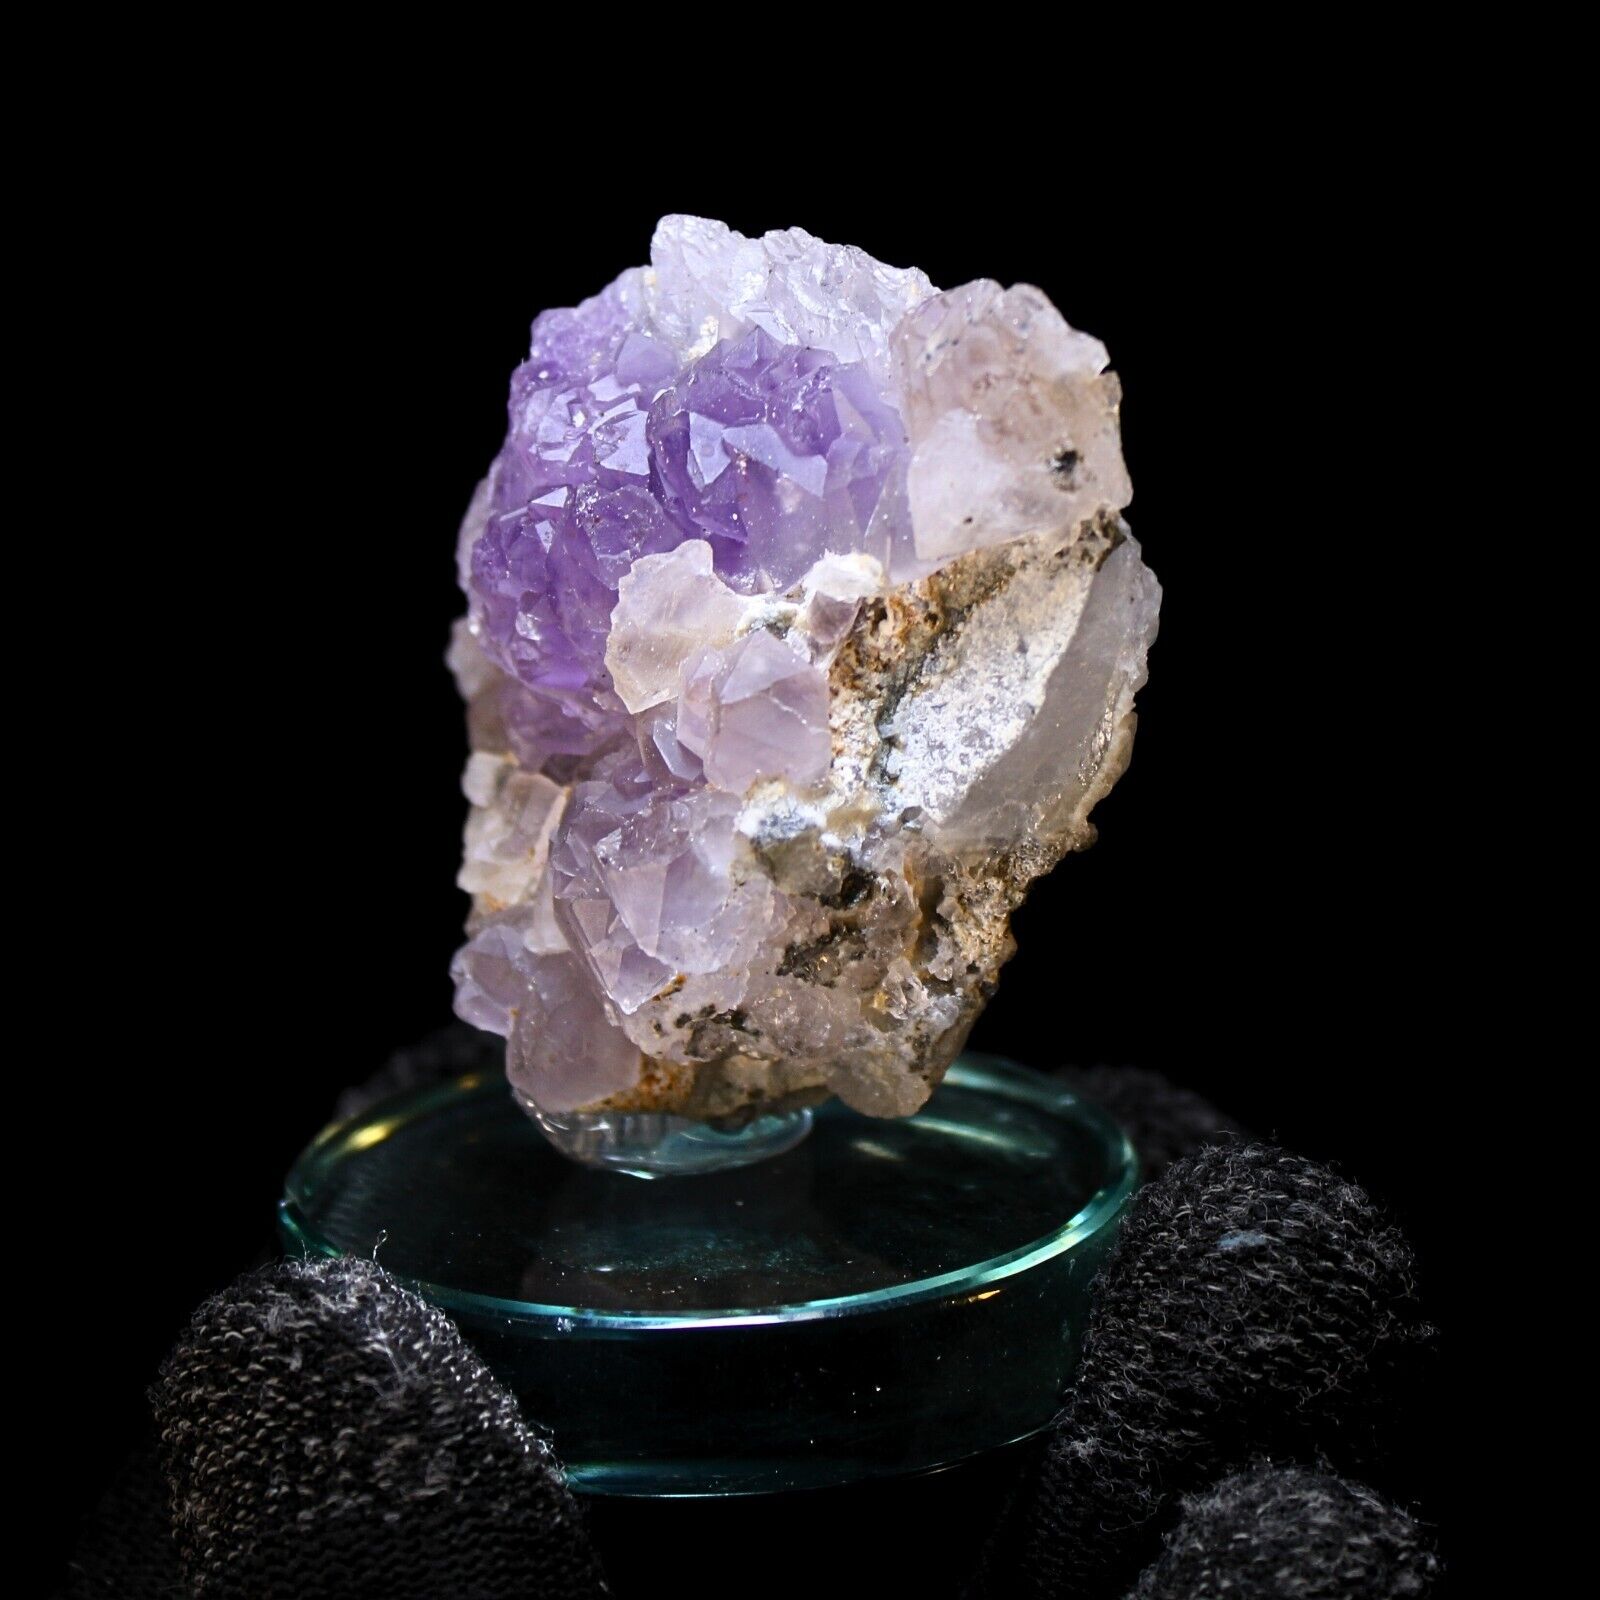 150g Gorgeous Purple Scepter Amethyst Quartz Crystal Stone With Stand 3x3x5cm 